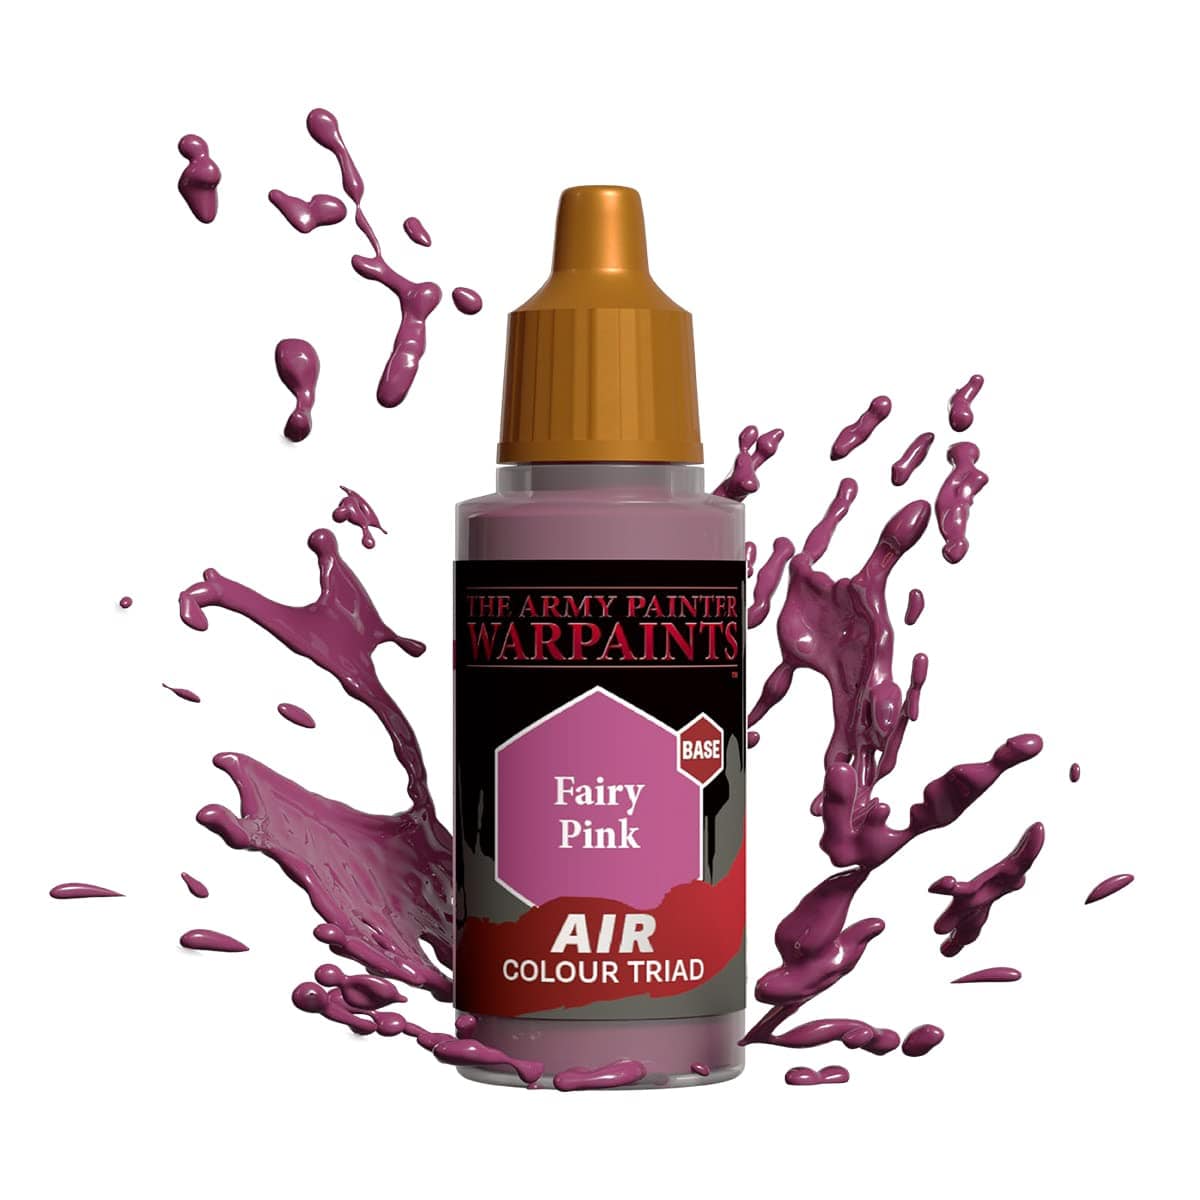 The Army Painter Warpaints Air: Fairy Pink 18ml - Lost City Toys